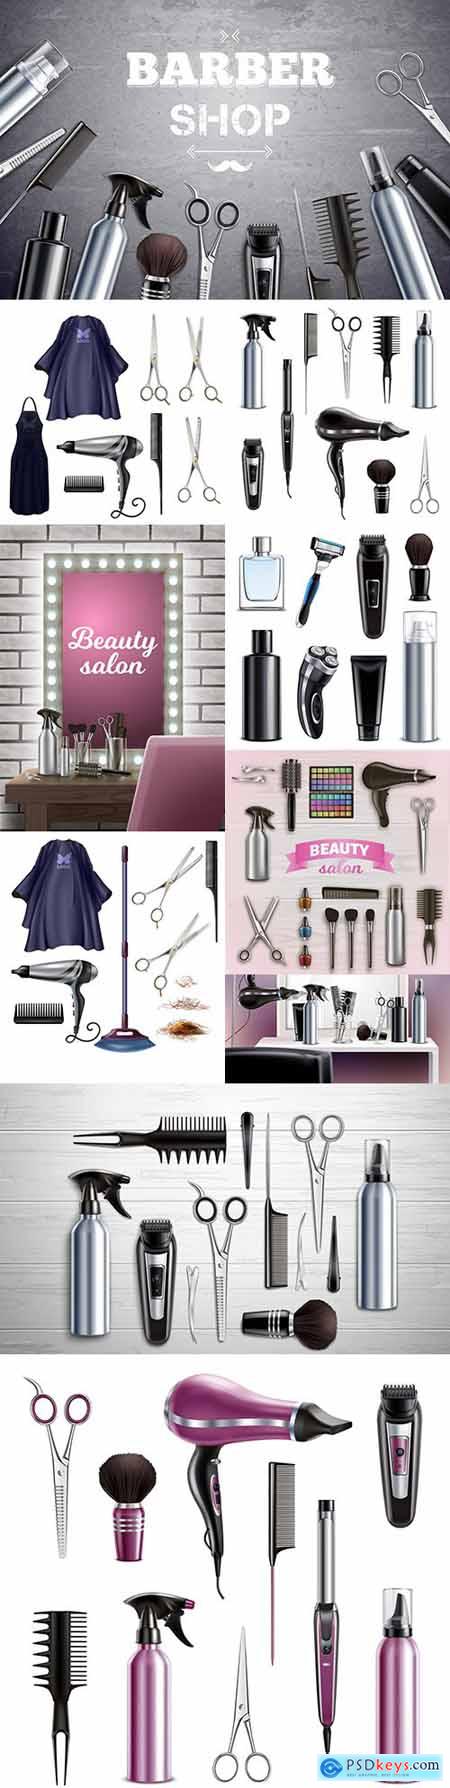 Hairdressing tools for hair styling and shaving realistic illustrations